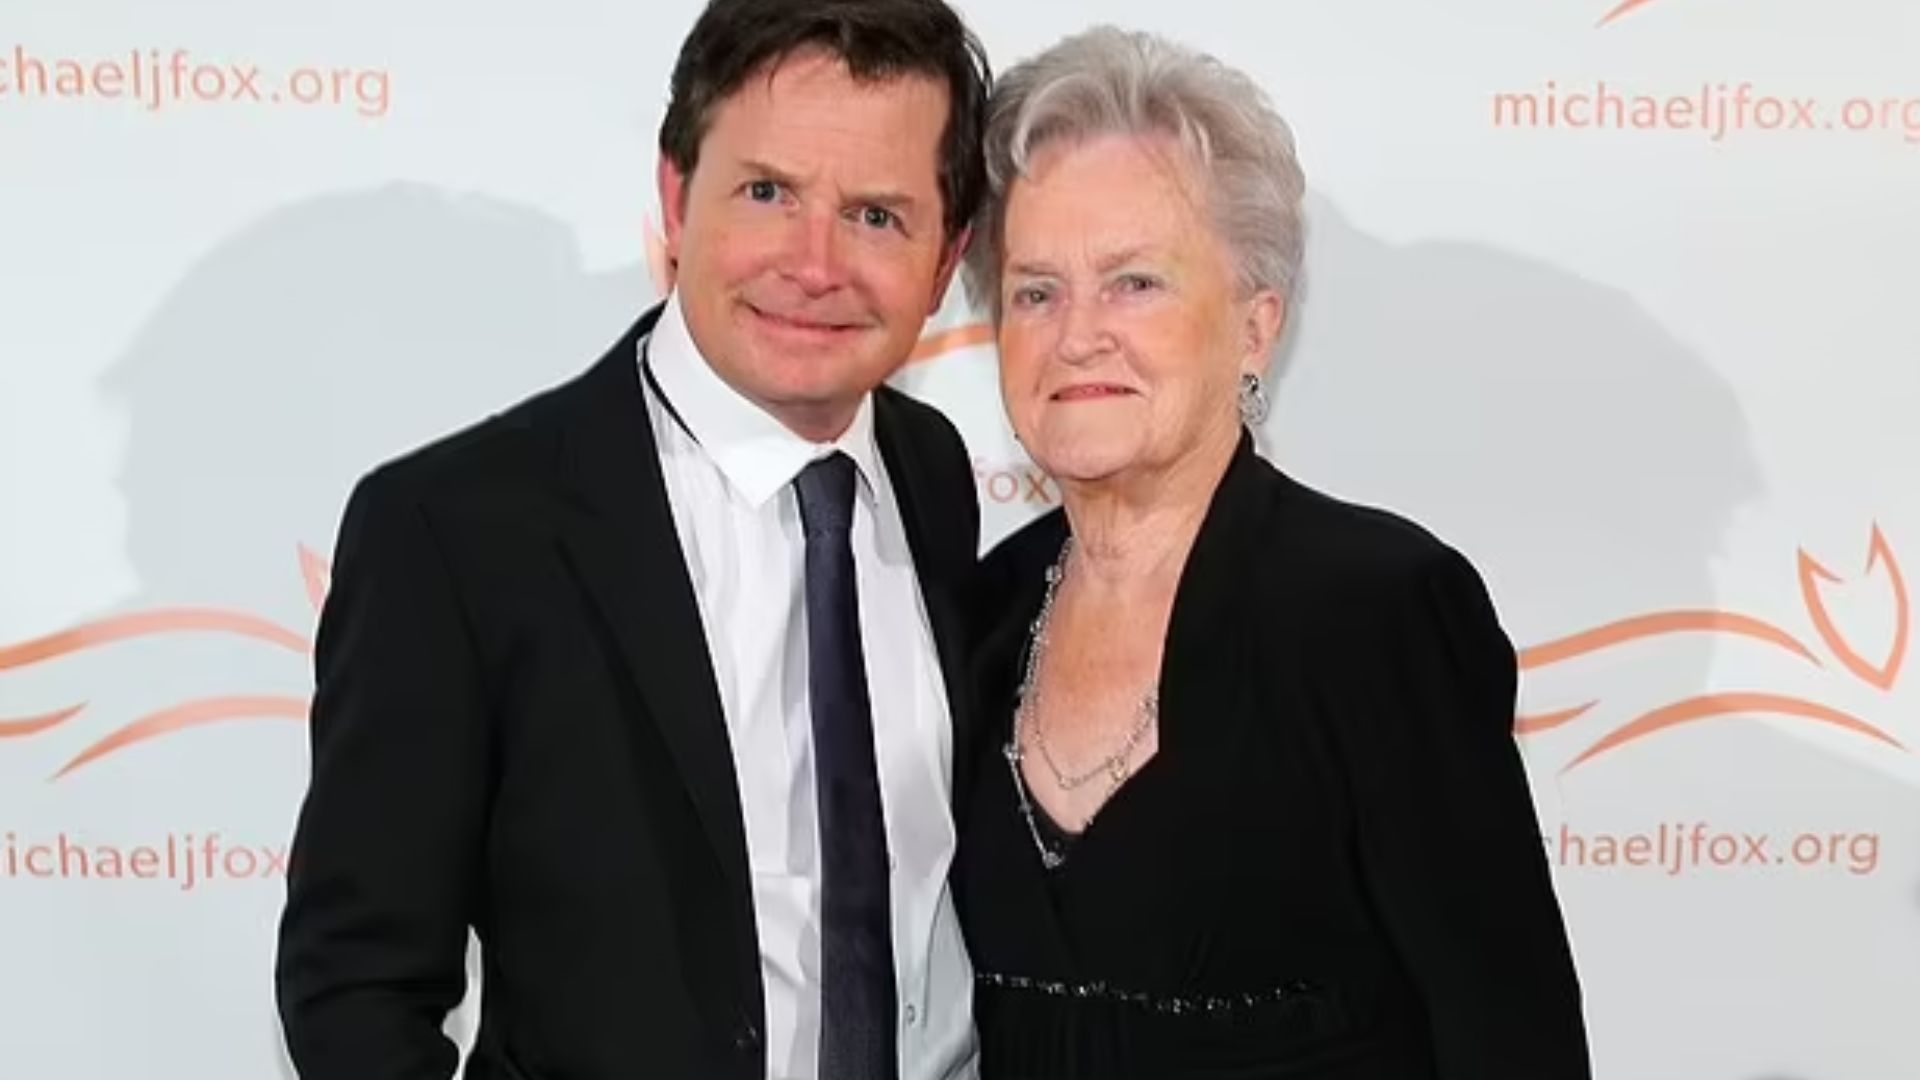 Michael J Fox shared that his mom Phyllis Fox died at 92 years old